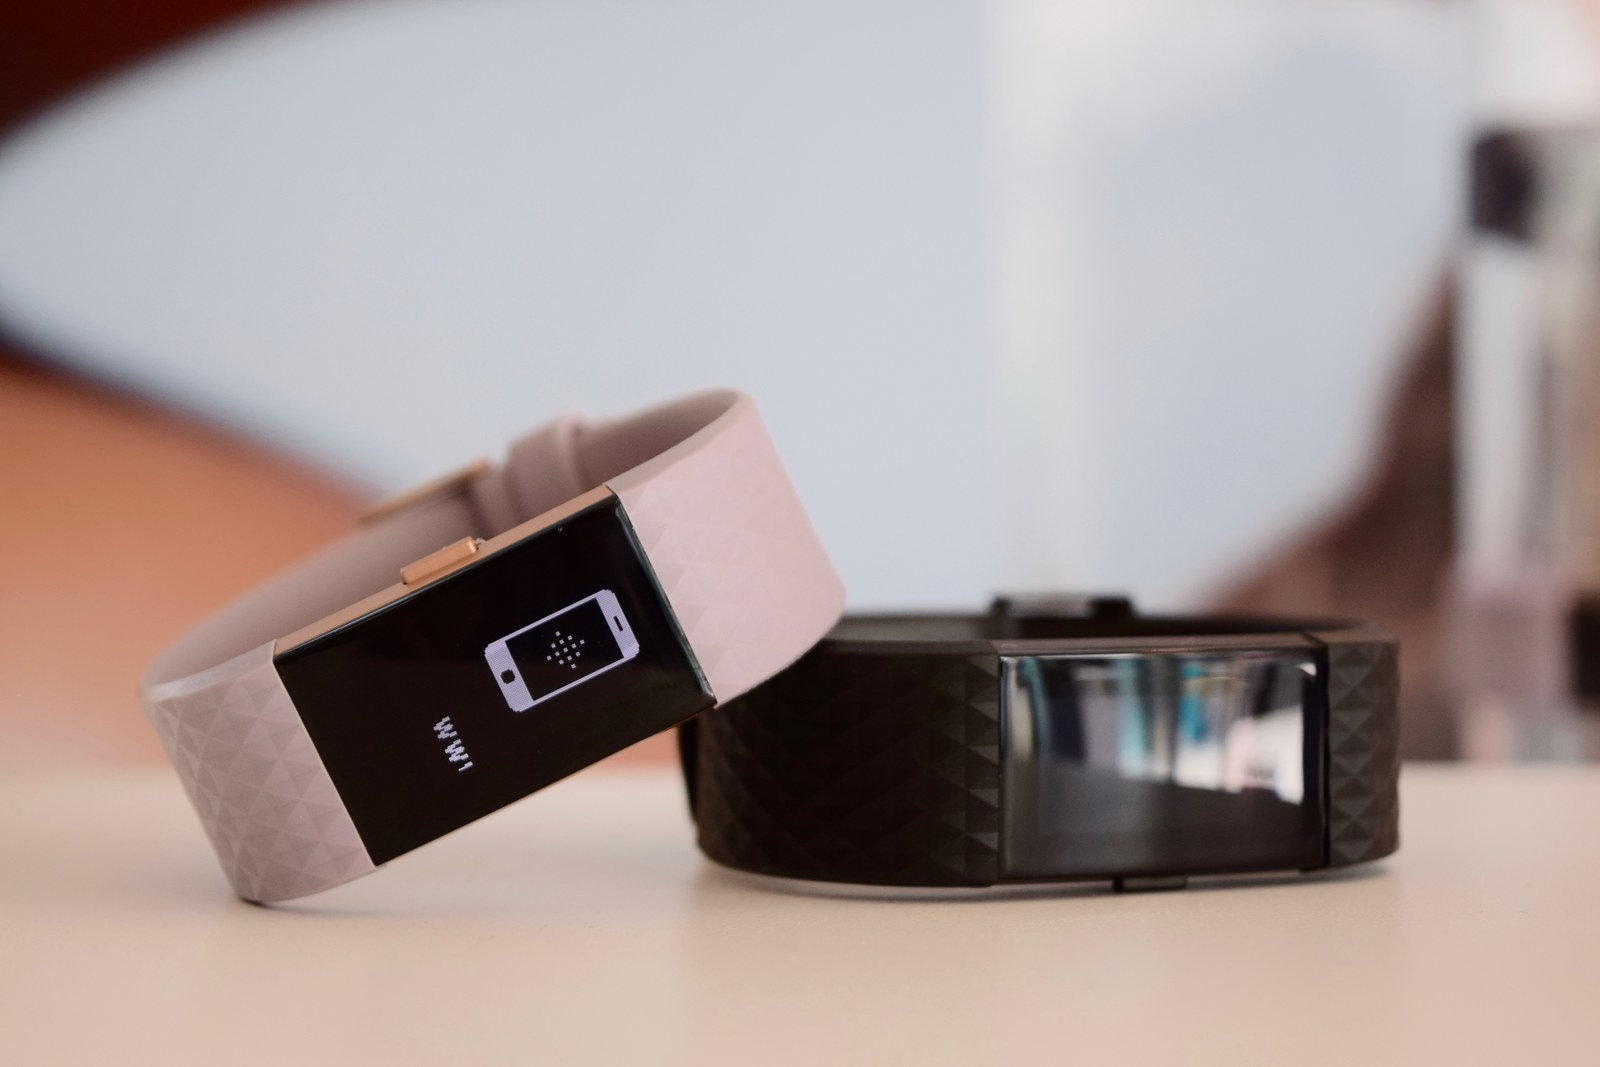 The New Fitbit Charge 2 Wants You To Work Out, Not Just Count Steps